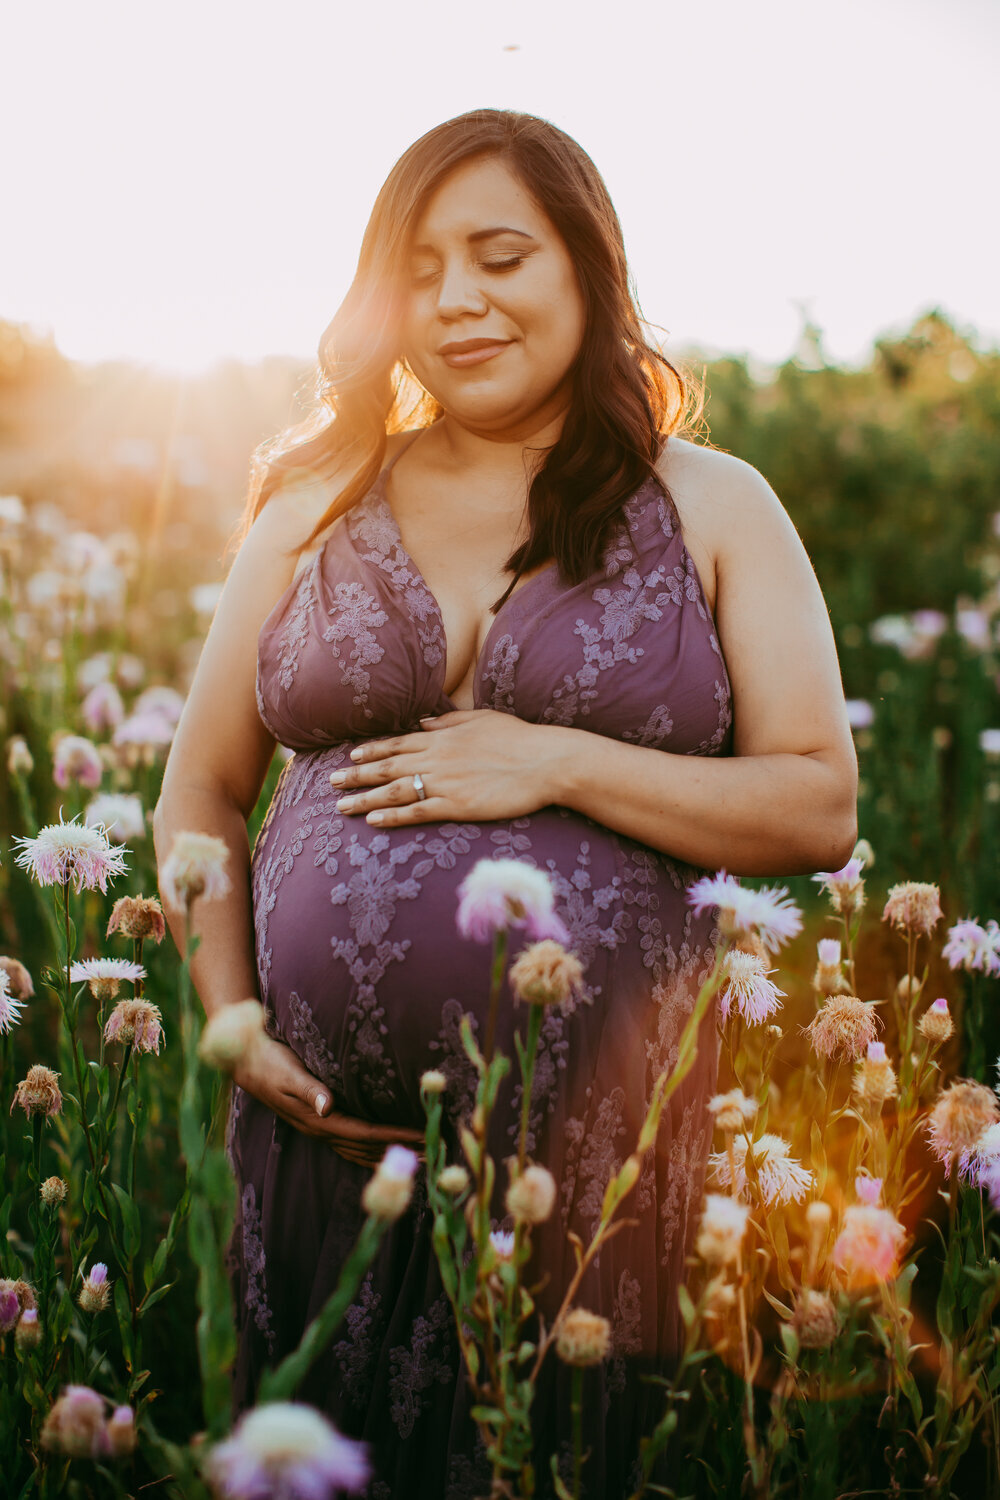  This mom to be held her baby inside her belly so tenderly. Motherhood is truly and amazing gift! #tealawardphotography #texasmaternityphotographysession #amarillophotographer #amarilloematernityphotographer #emotionalphotography #lifestylephotography #babyontheway #lifestyles #expectingmom #newaddition #sweetbaby #motherhoodmagic 